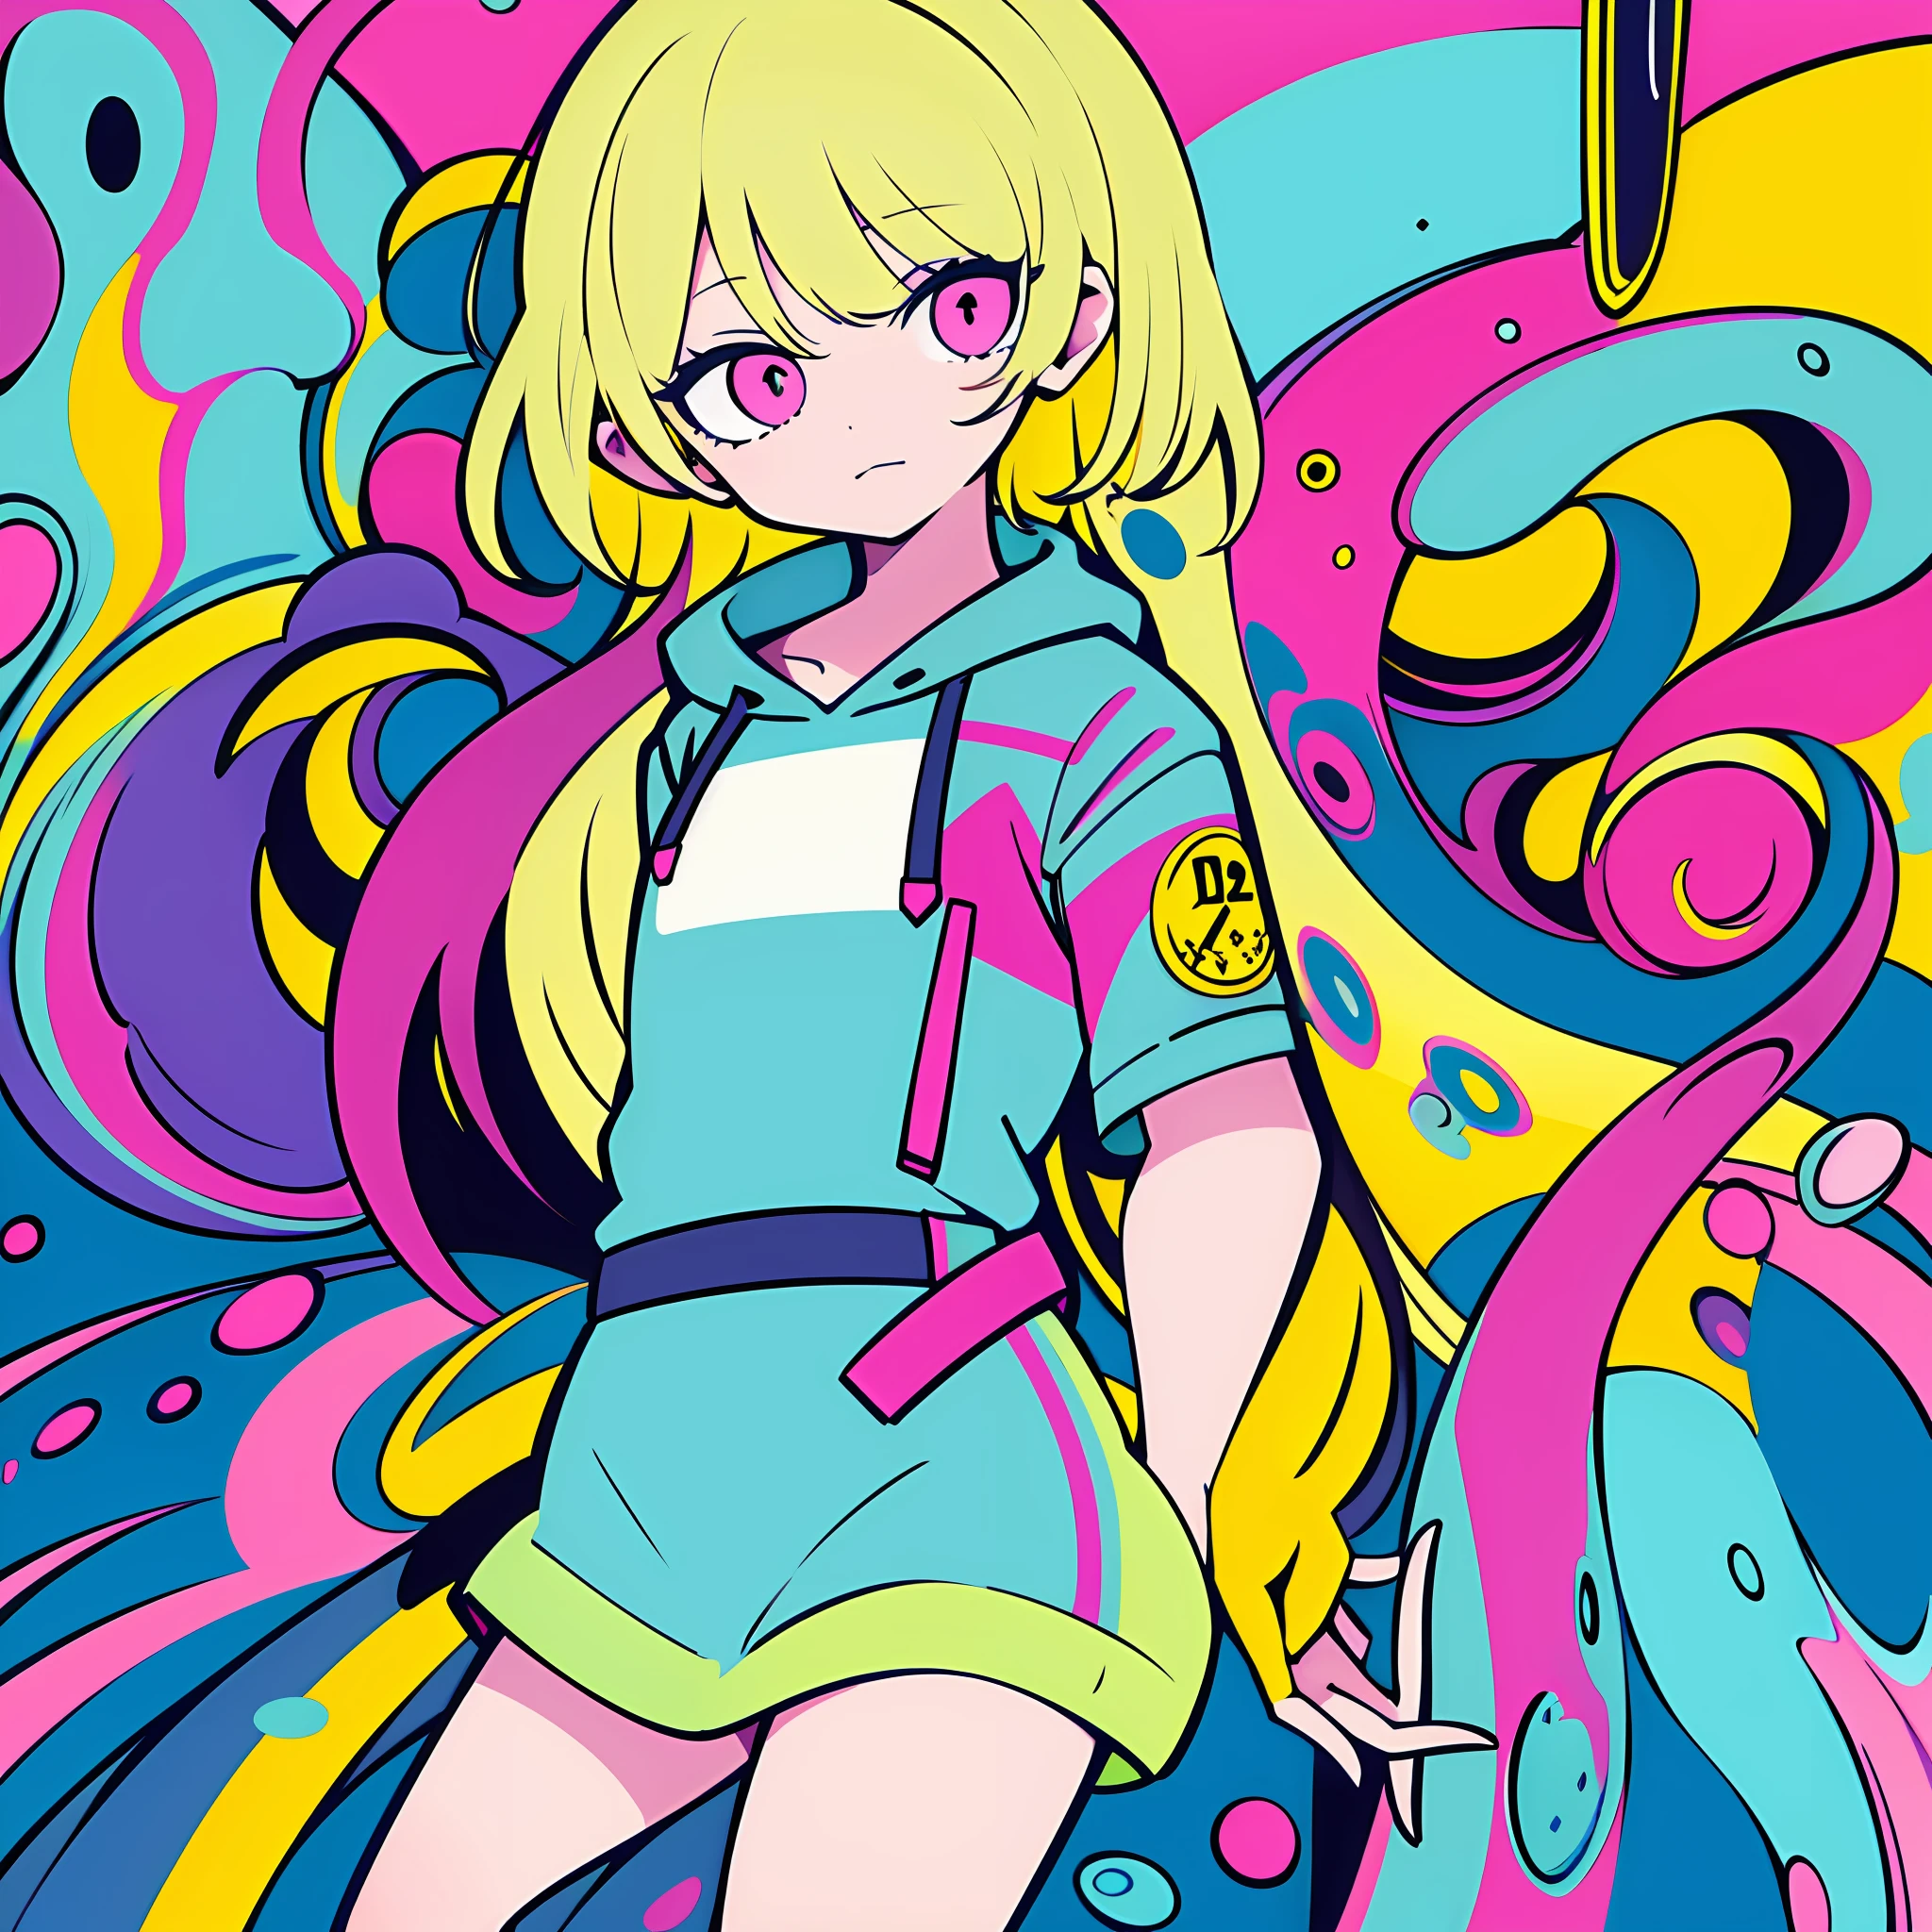 (Ultra Detailed,Ultra High Definition,Detailed Background),((2D)),((Flat Color)),((Colorful)),(((Floating Colorful Water))),1 Girl,Solo,Watch Viewer,Break,Hair Color
blond hair
Dress
Hoodie
character
tidy